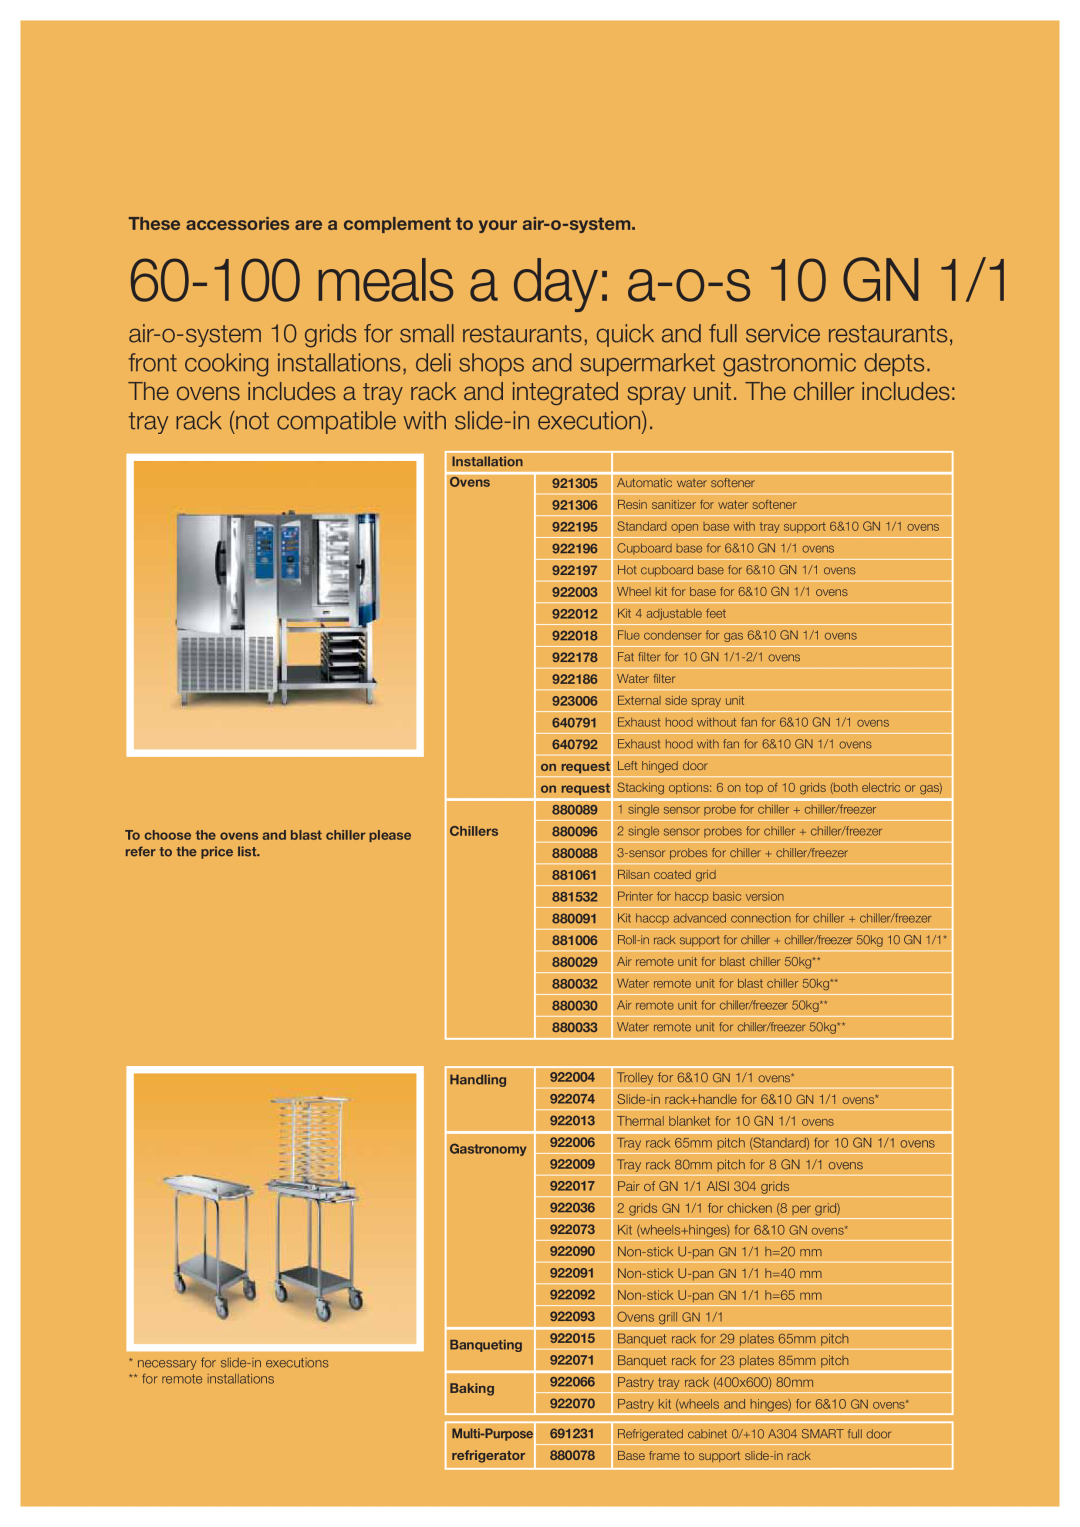 Electrolux 922010, 726496, 691231 manual meals a day a-o-s 10 GN 1/1, These accessories are a complement to your air-o-system 